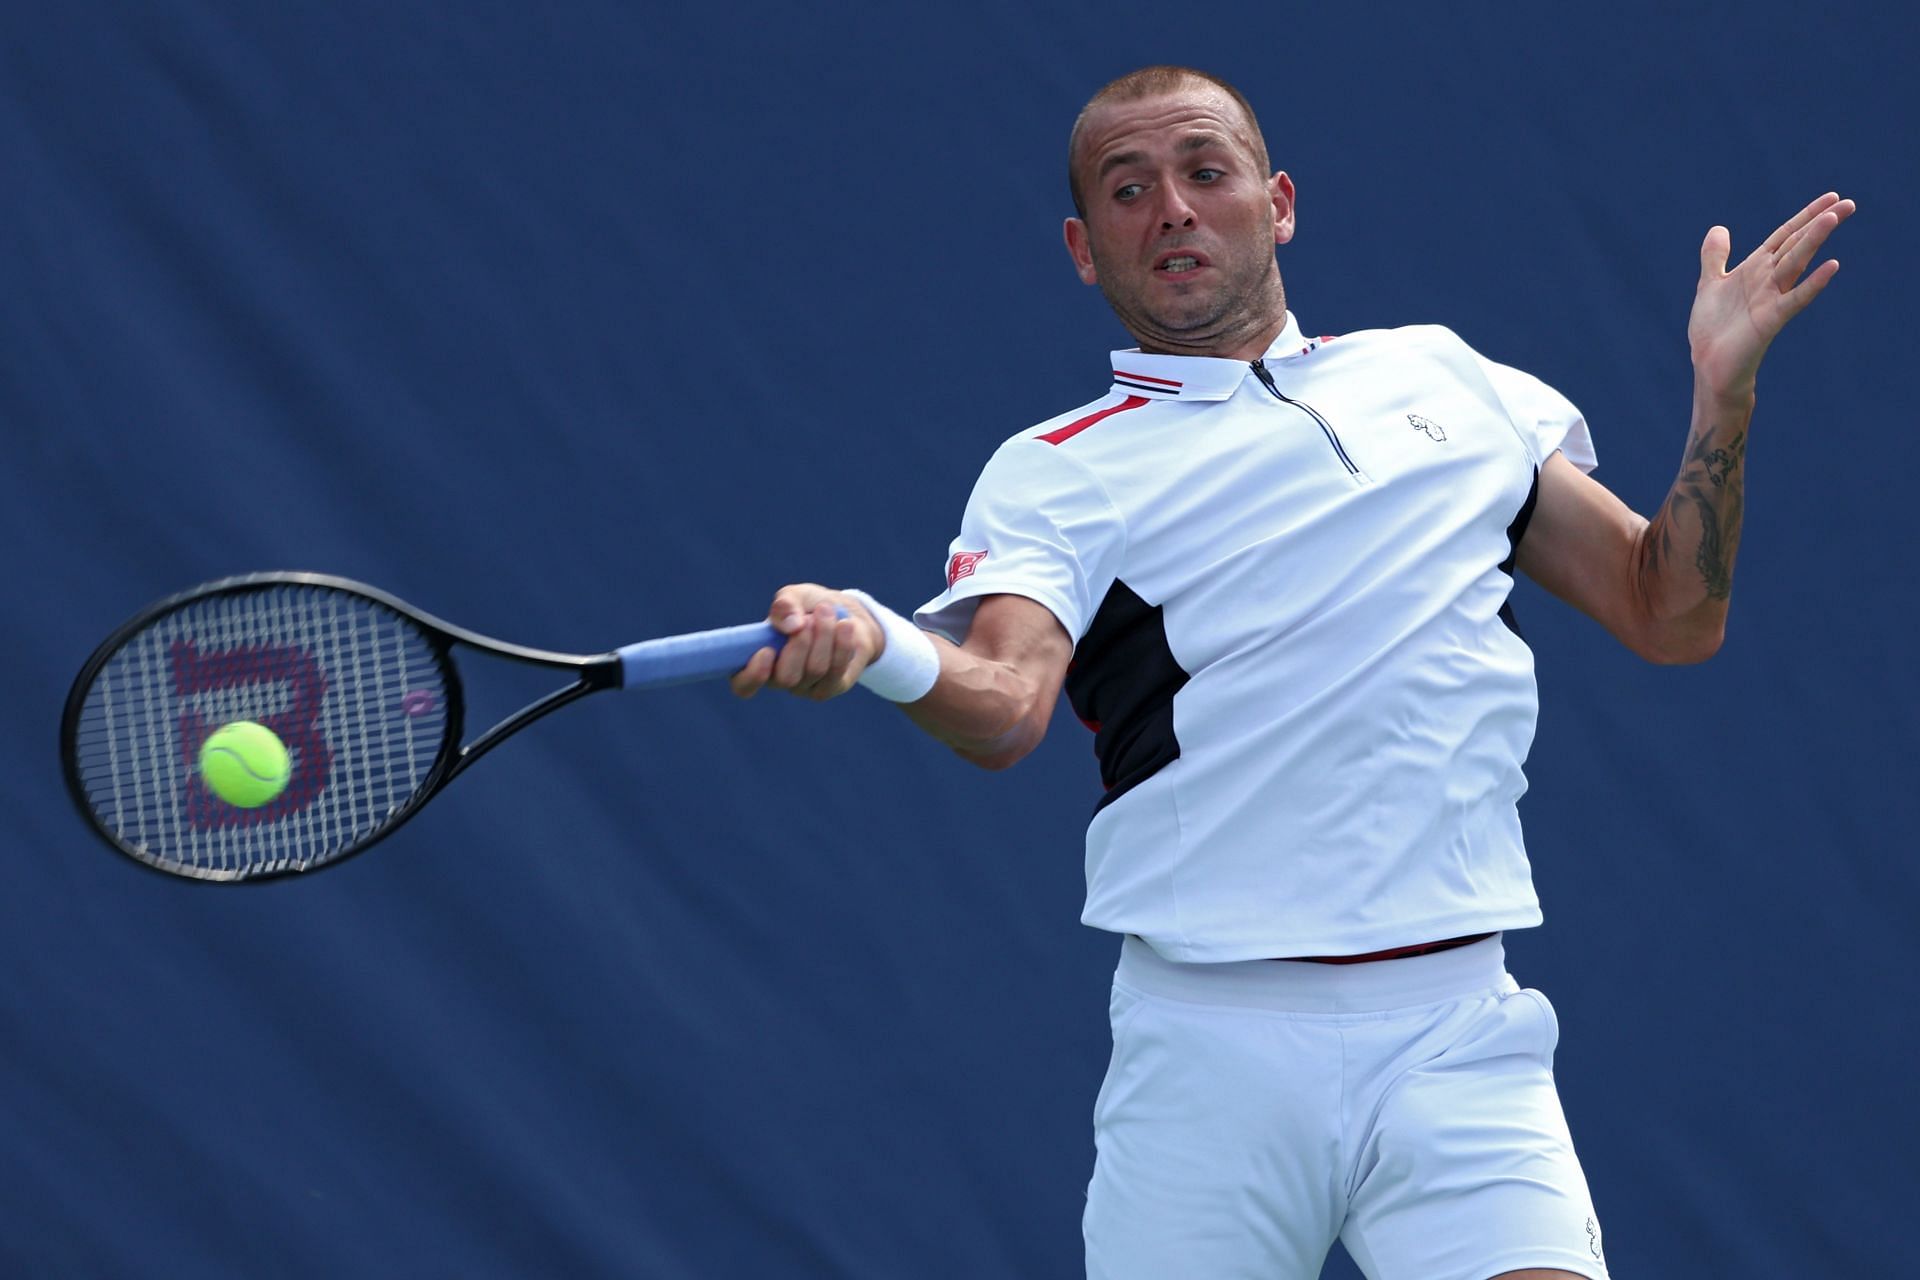 Dan Evans in action at the Citi Open - Day 6